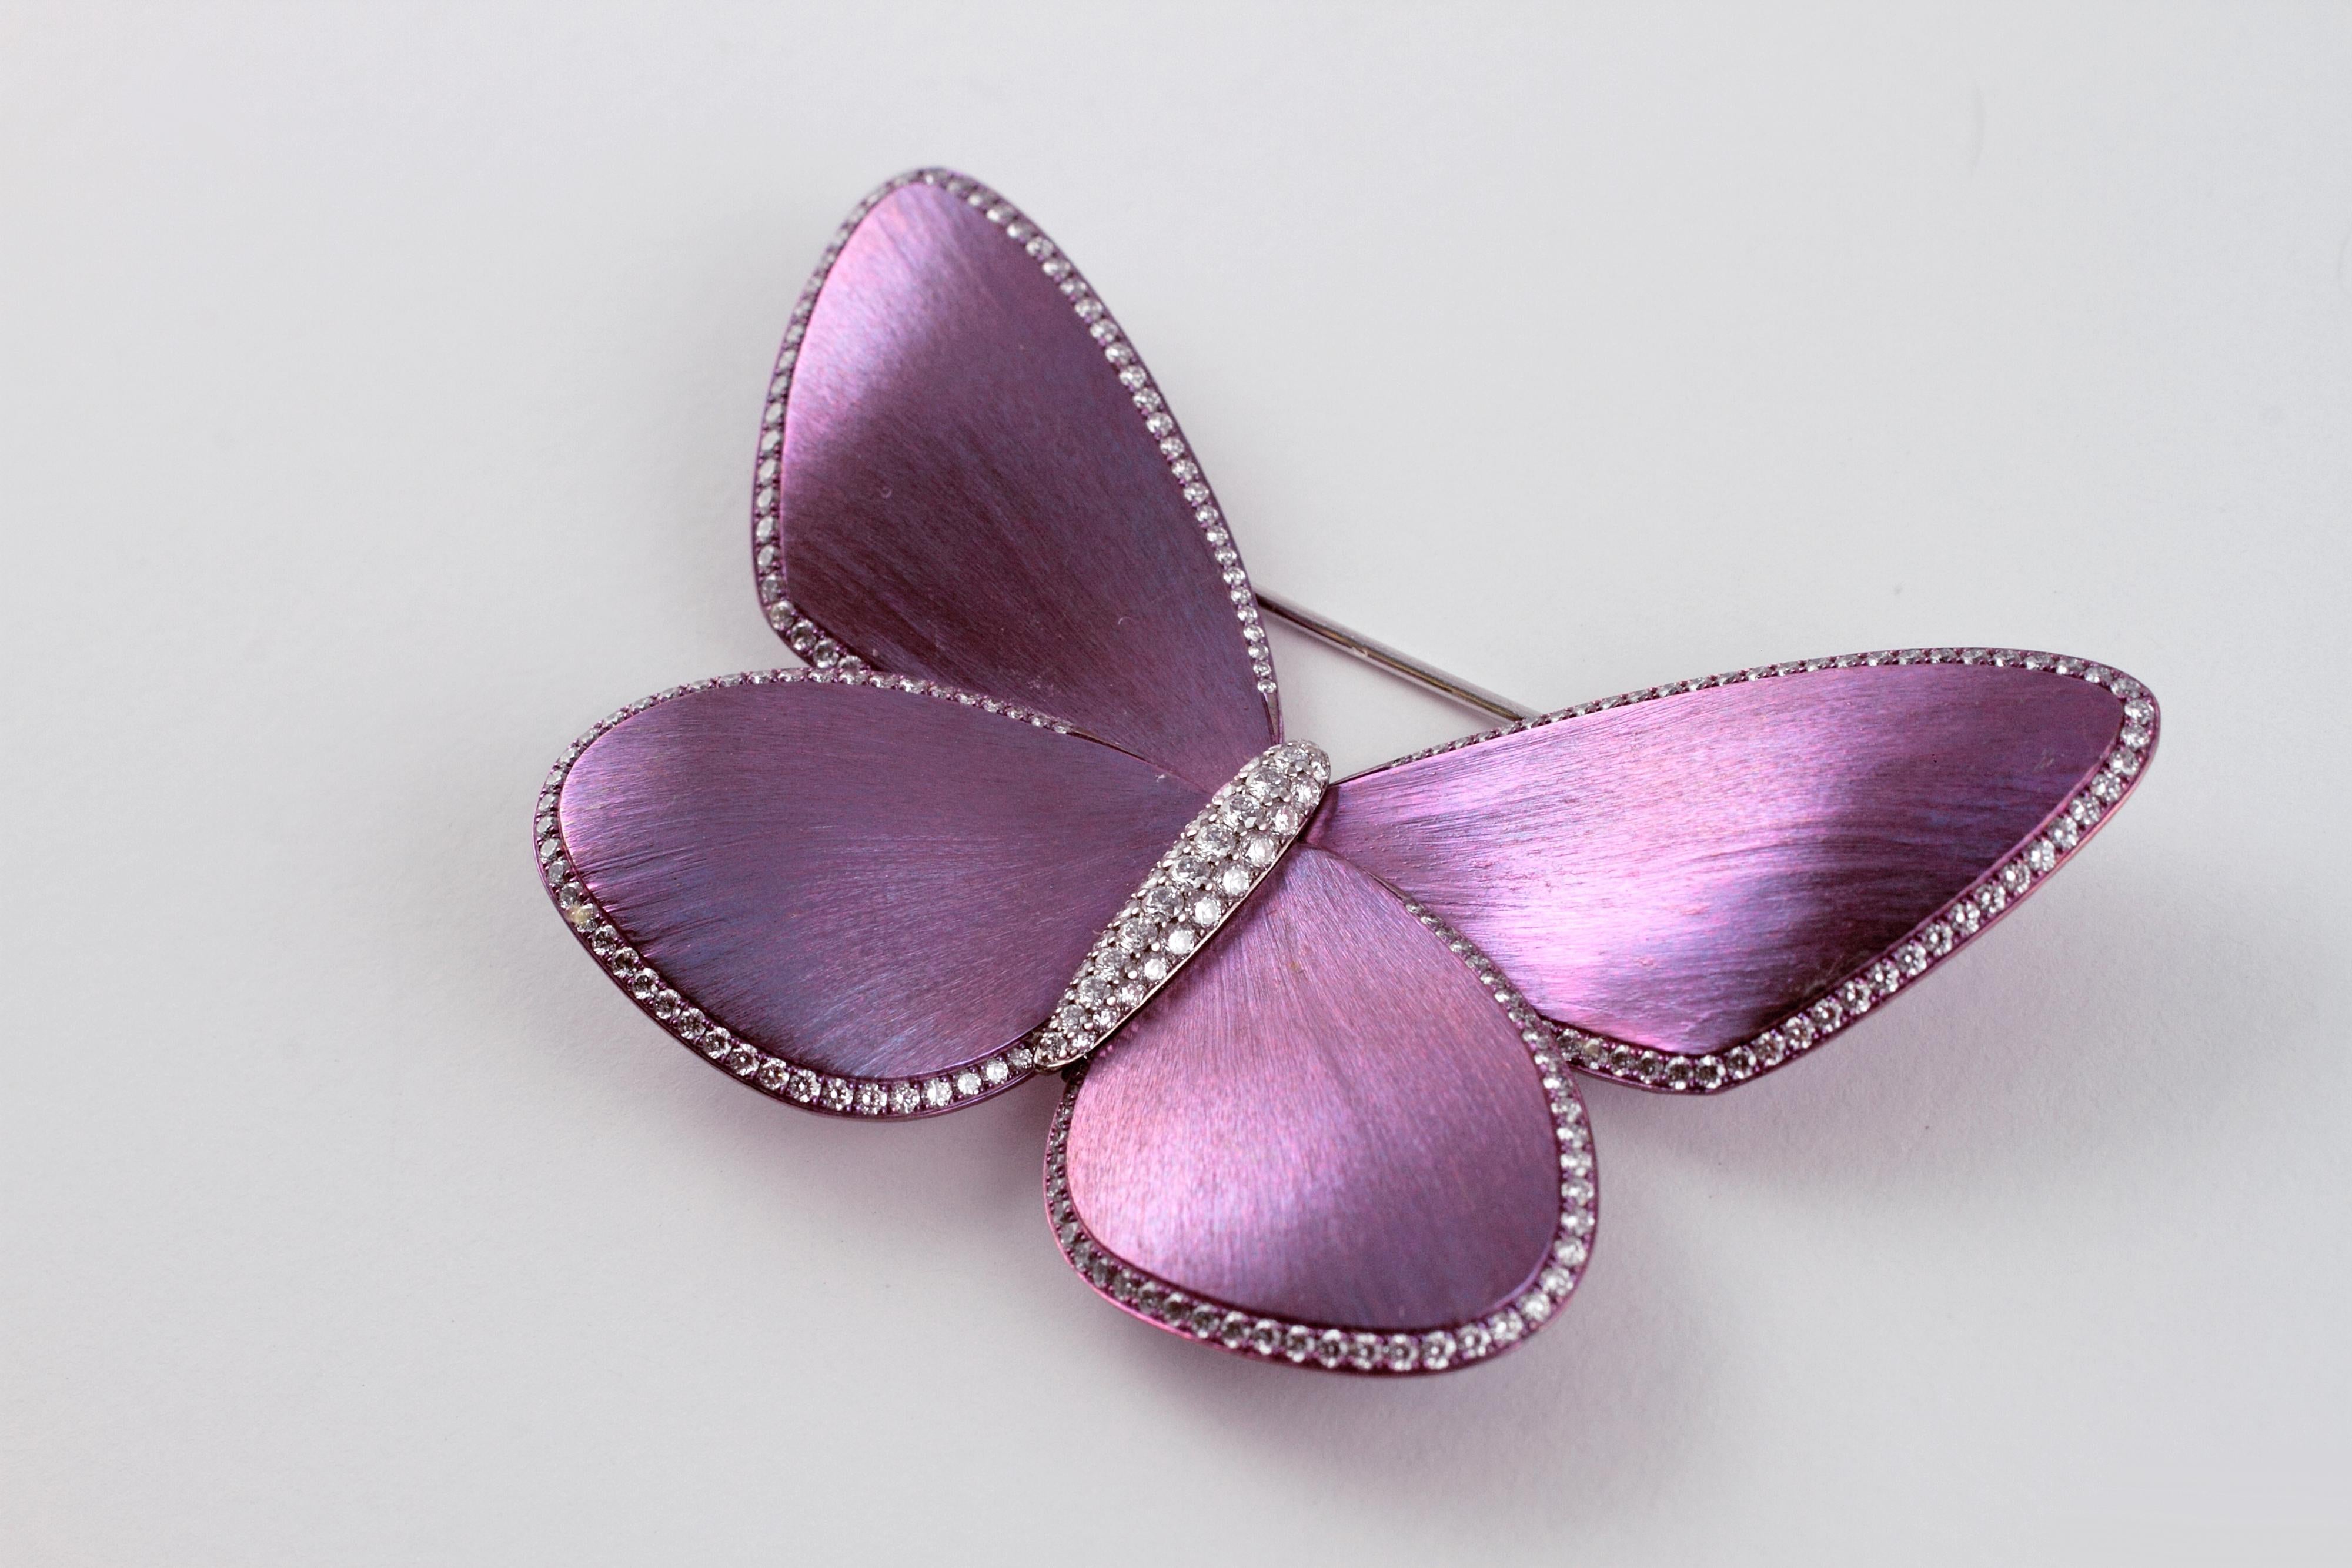 For the Eclat collector, or the first time buyer, this is truly an unusual item.  The lovely purplish titanium wings are accented by a diamond trim and diamond central body.  The Neiman Marcus receipt states that the diamonds are 1.31 carats in